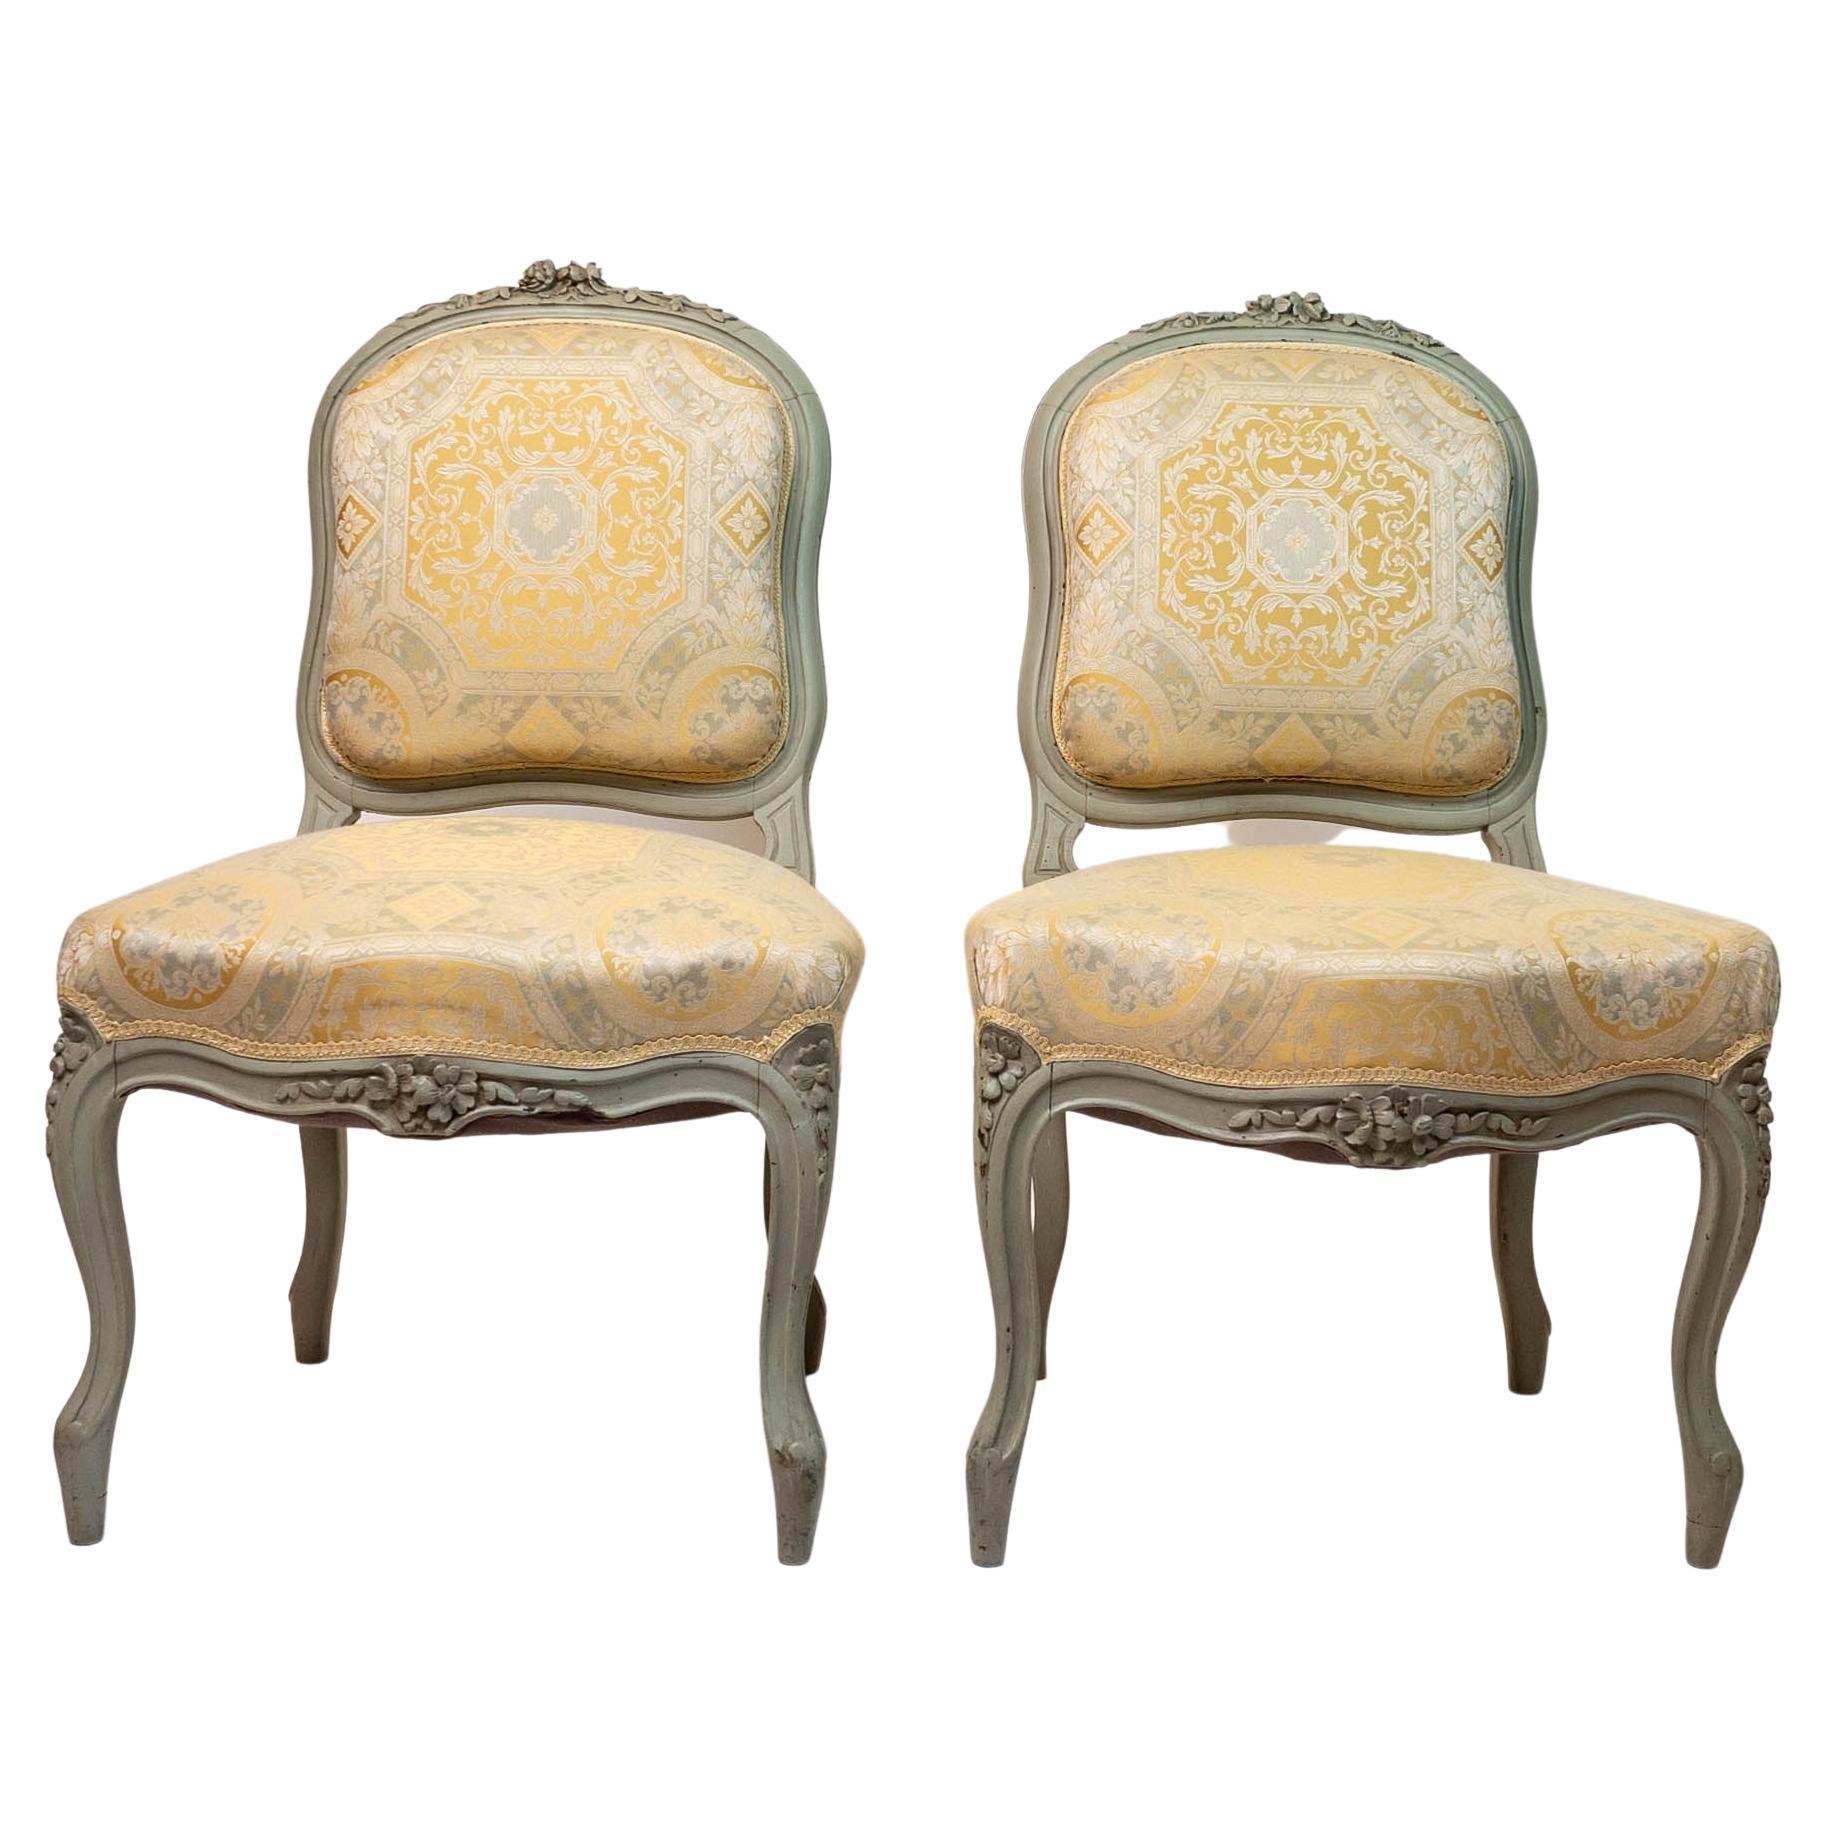 Romantic Celadon Painted Pair of Carved Wood French Louis XV Style Side Chairs